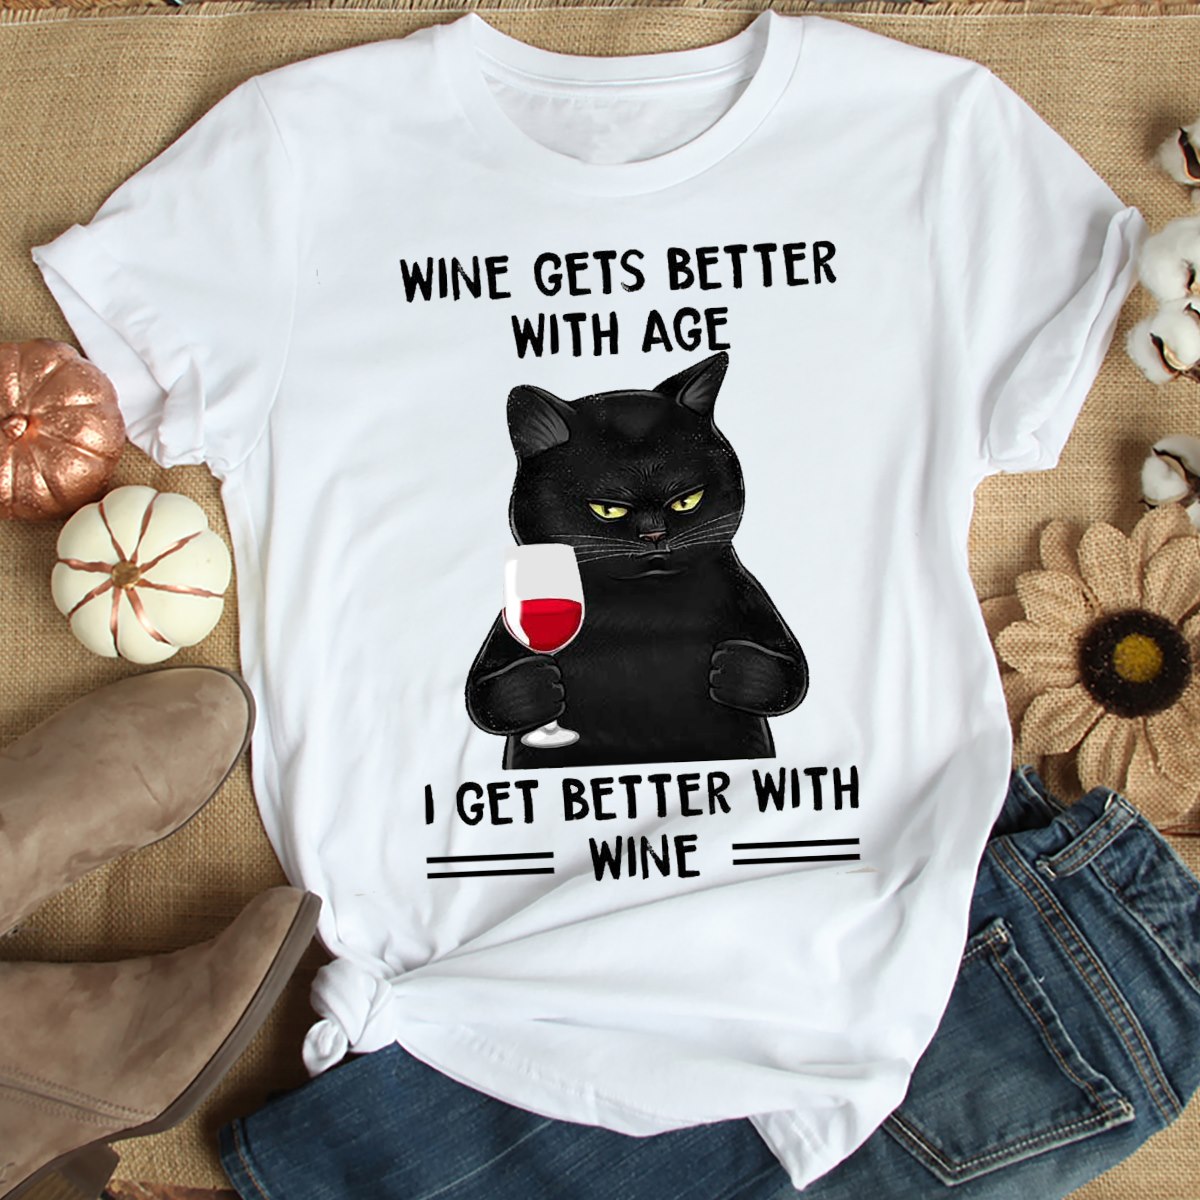 Wine gets better with age I get better with wine - Cat and wine